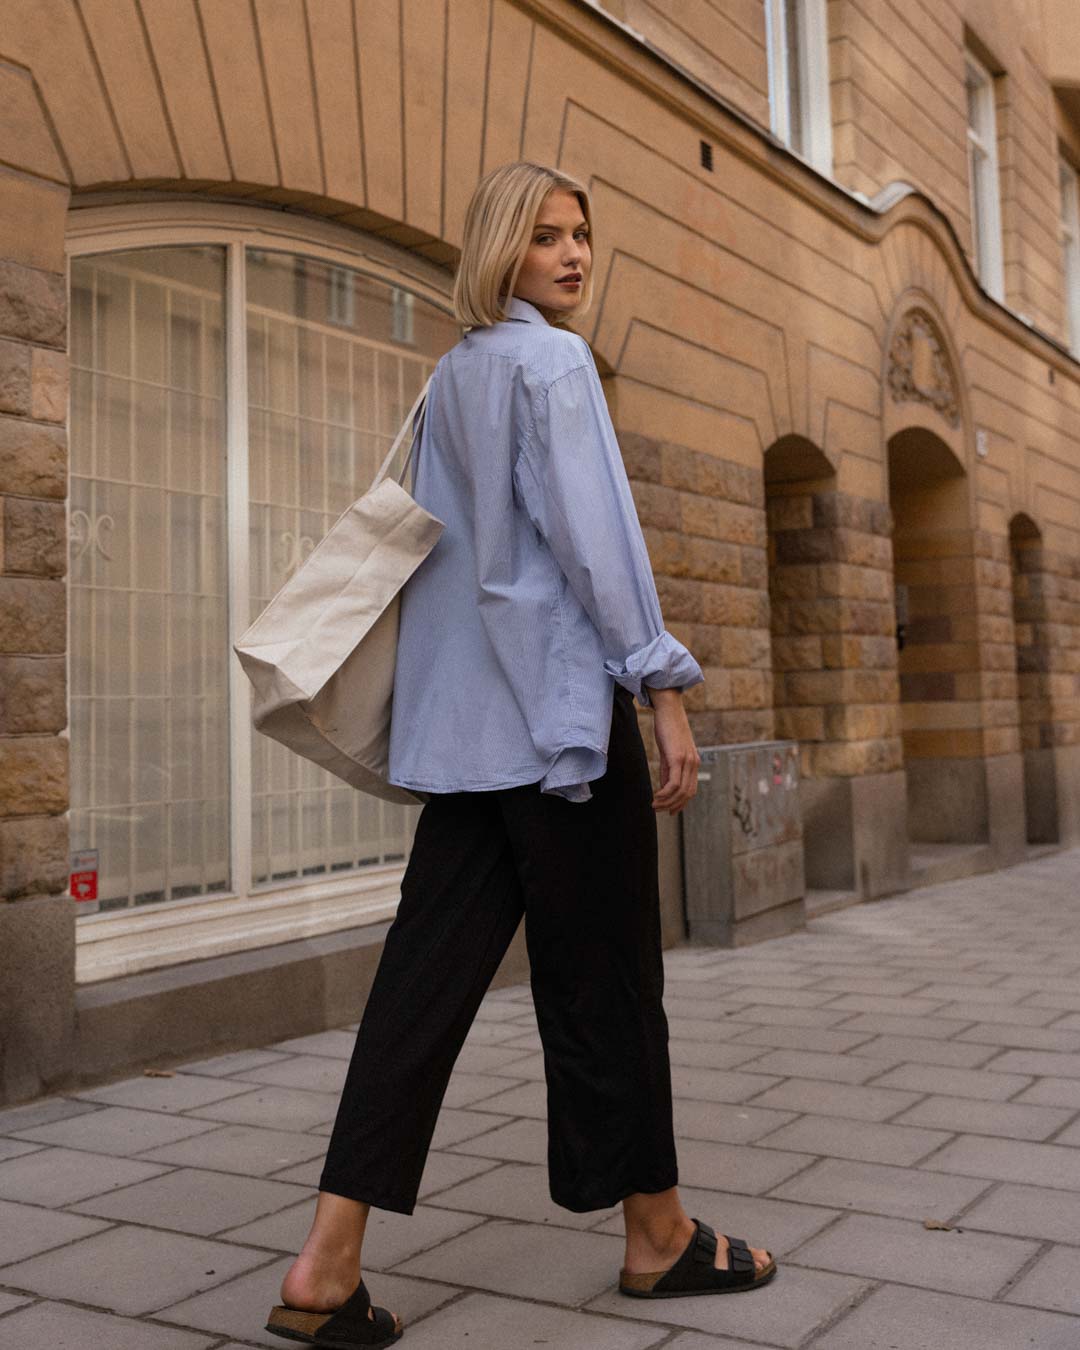 Blonde woman in cropped ninepine pants and blue shirt walking down a Stockholm street